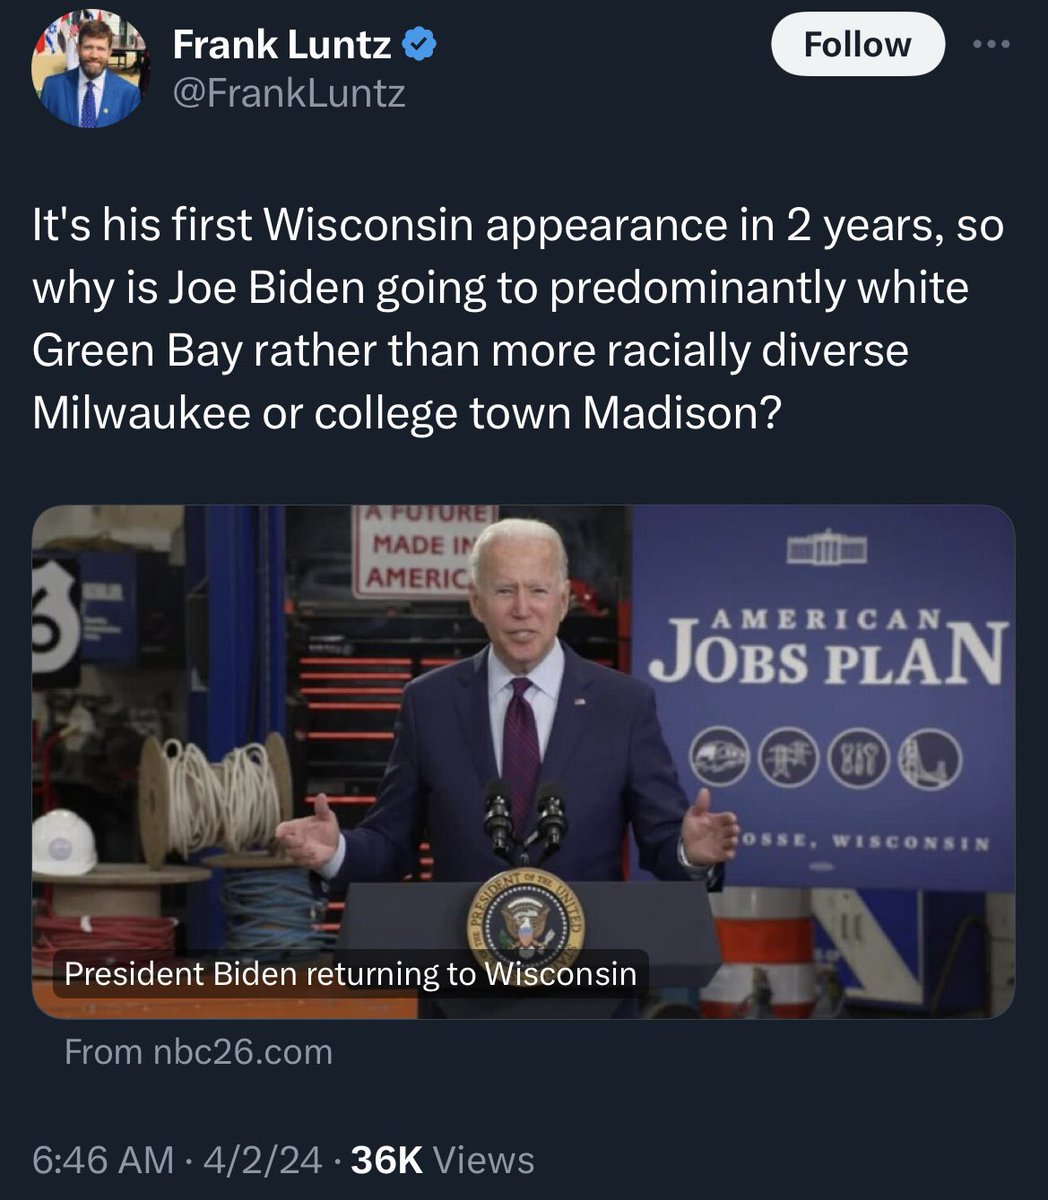 The story he posts literally says it is Biden’s 10th trip to WI as president and 3rd this year. He was in Milwaukee 3 weeks ago and has announced a trip to Madison on Monday. WTF is this guy doing??? Trust him though, he’s a very reliable pollster. Won’t steer you wrong.